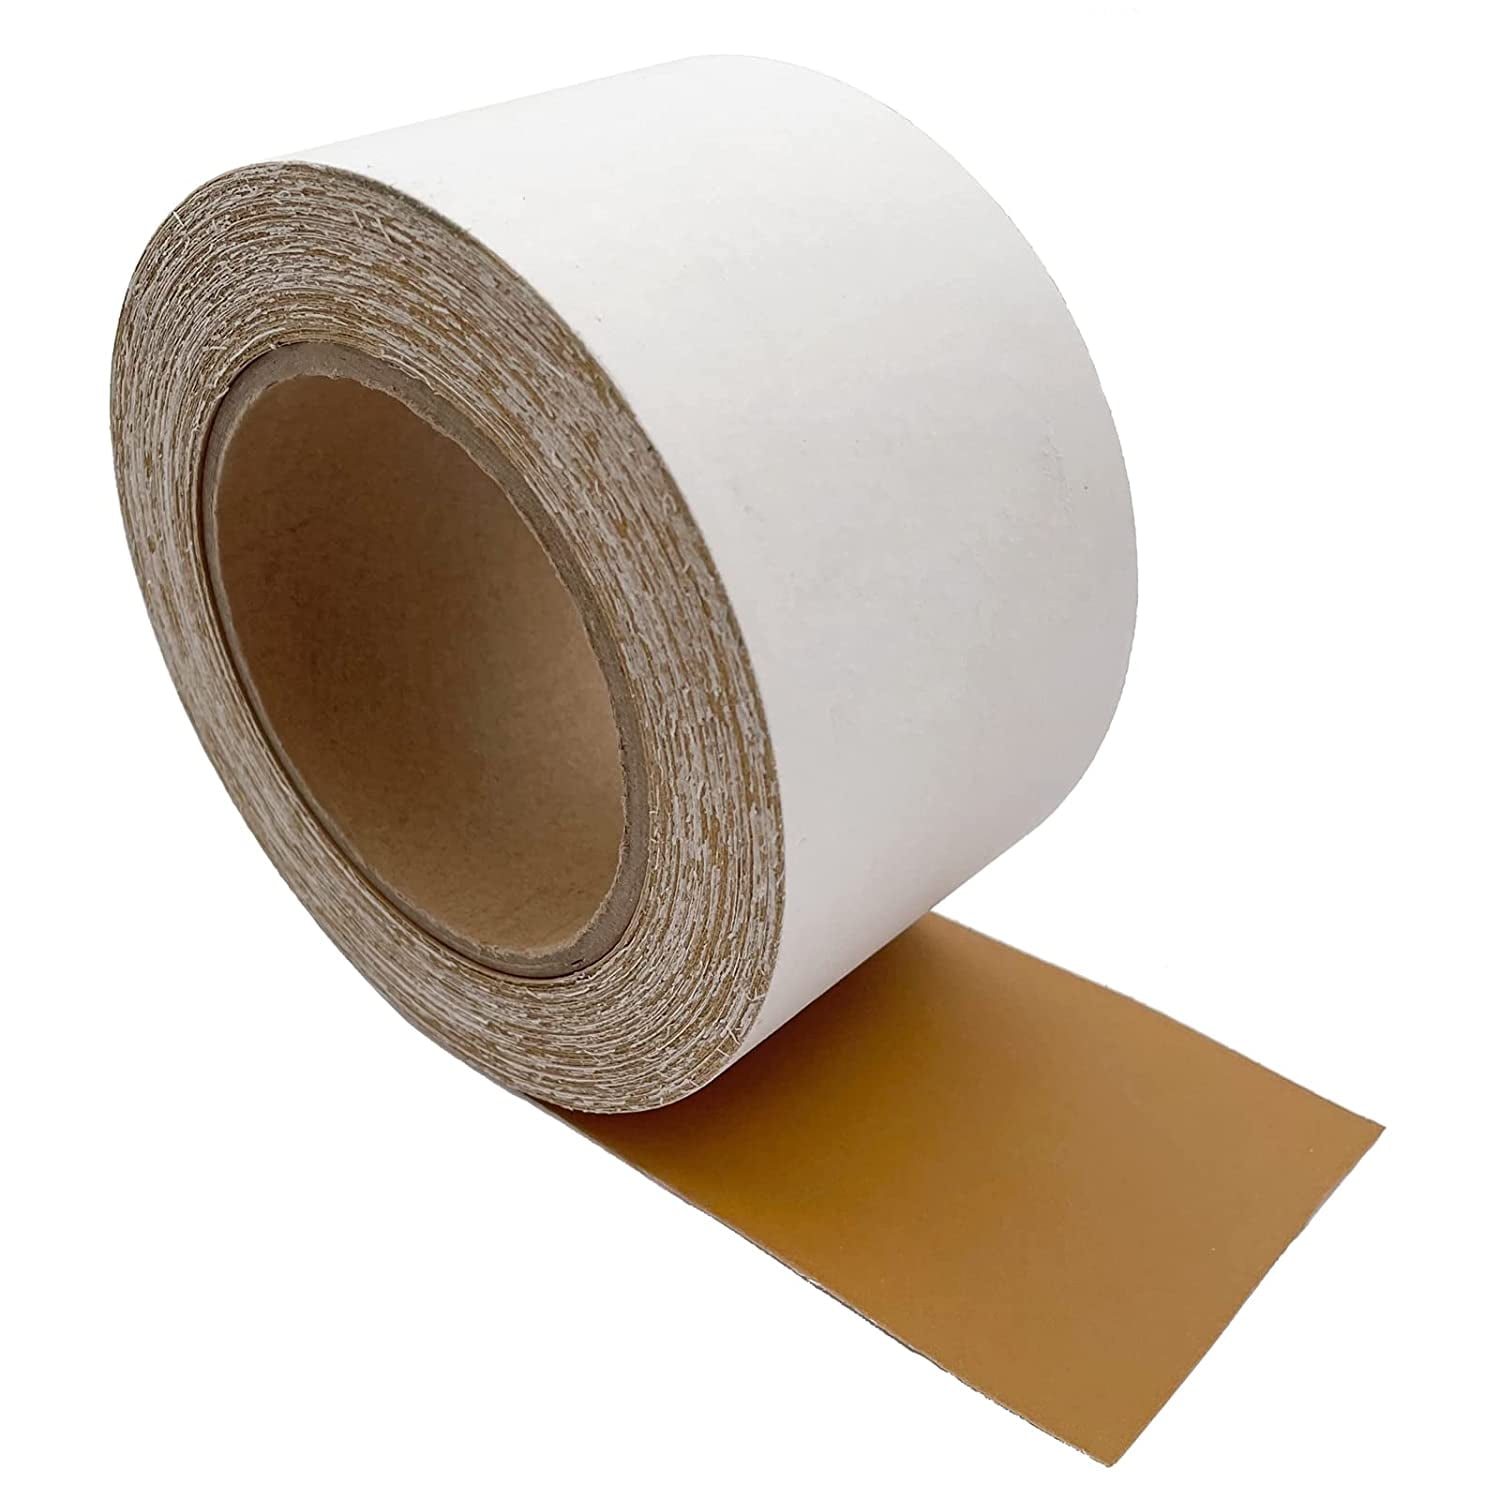 DSPIAE WSP-MA1500 #1500 Grit Adhesive Sandpaper 75mm x 25mm for AT